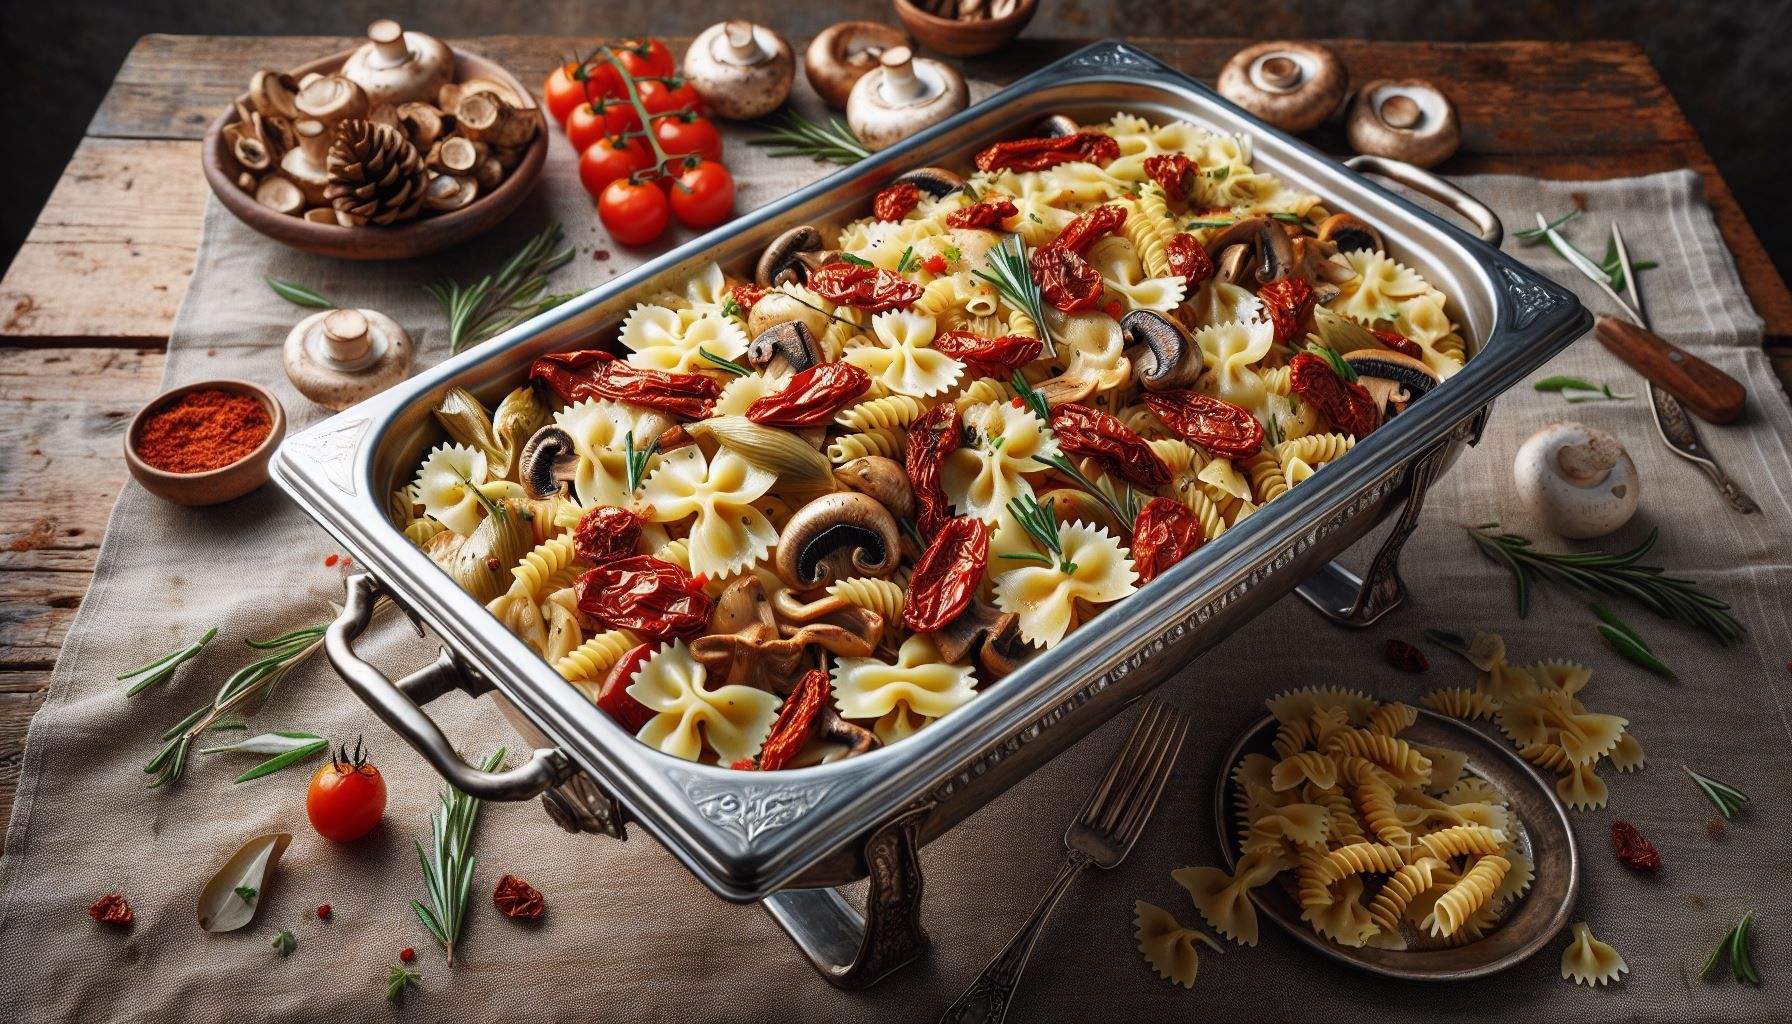 A tray of pasta with mushrooms and tomatoes on a wooden table.